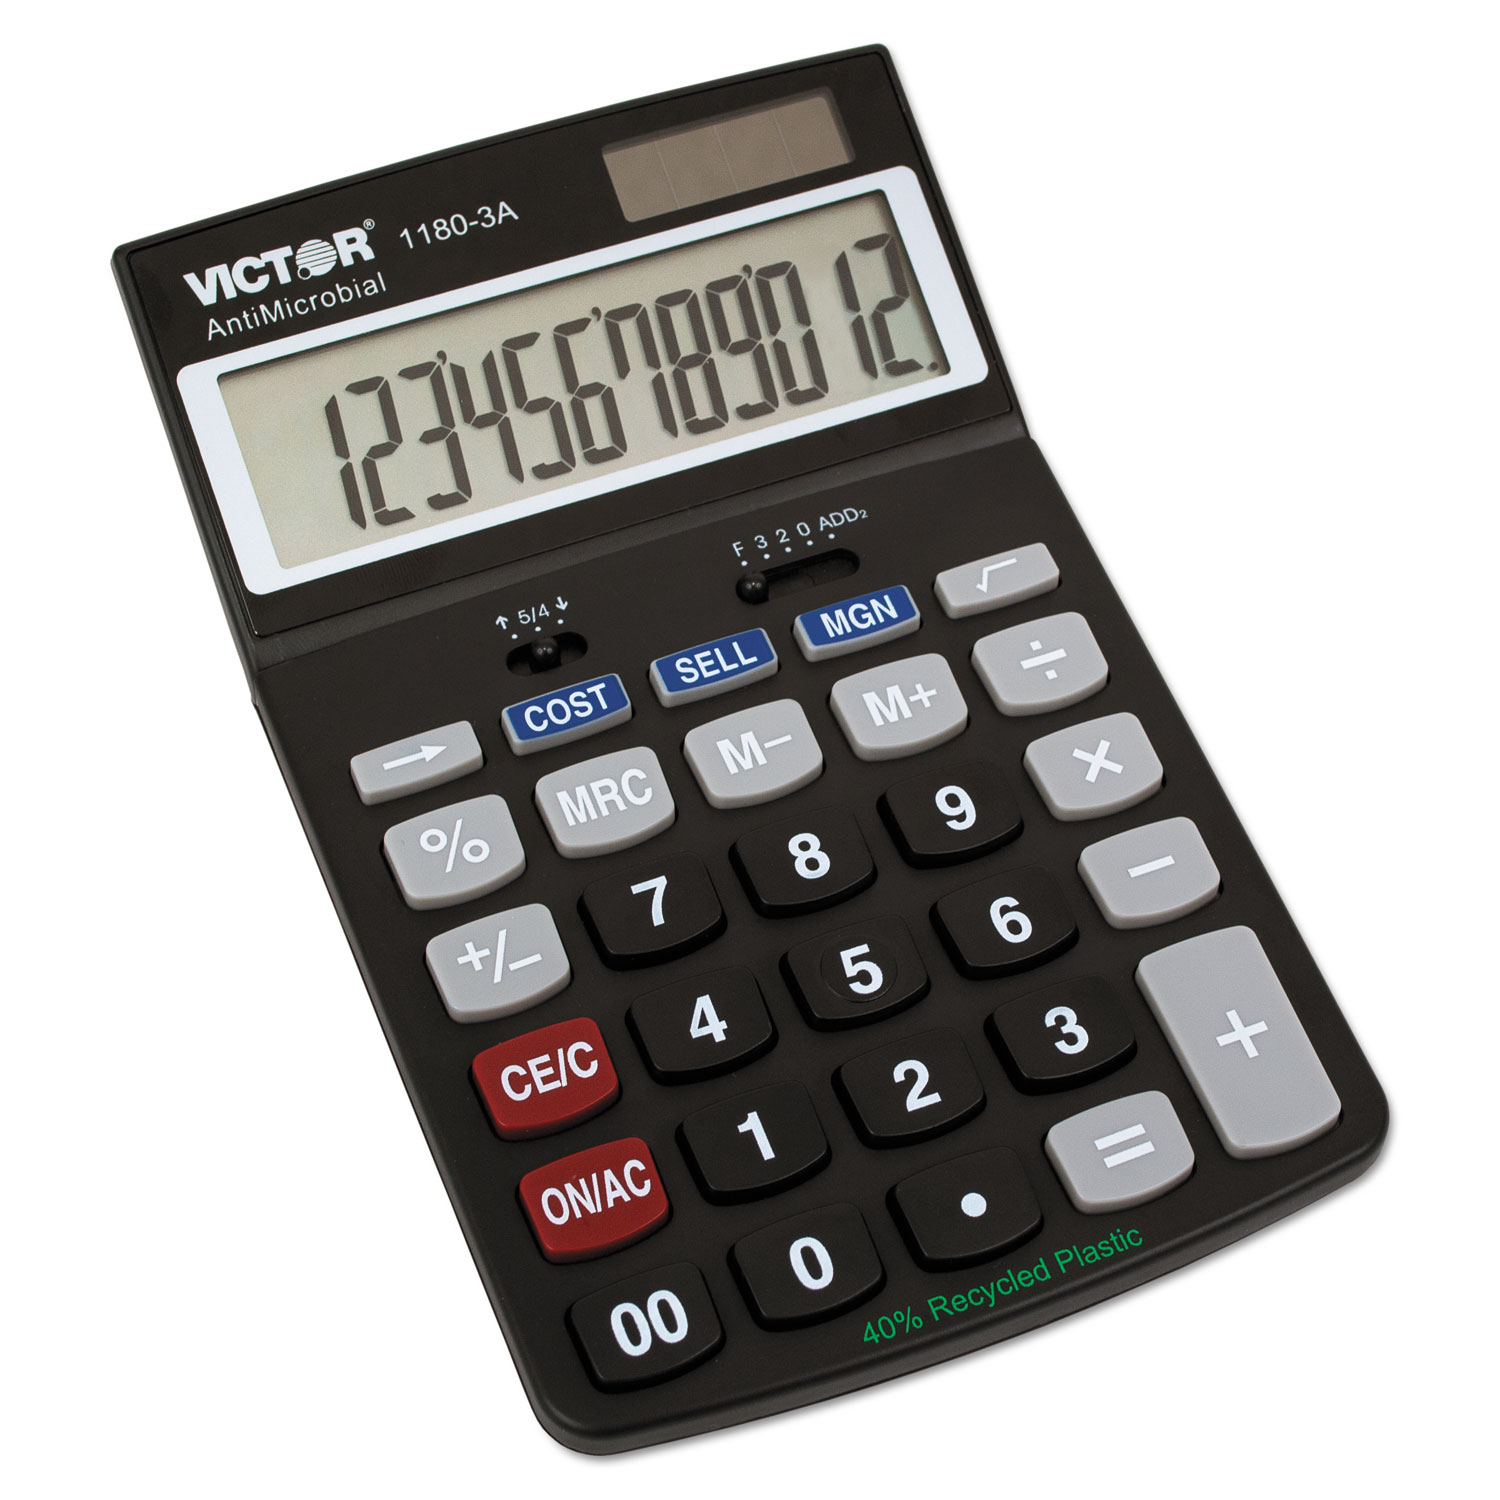  Victor 11803-A 1180-3A Antimicrobial Desktop Calculator, 12-Digit LCD (VCT11803A) 